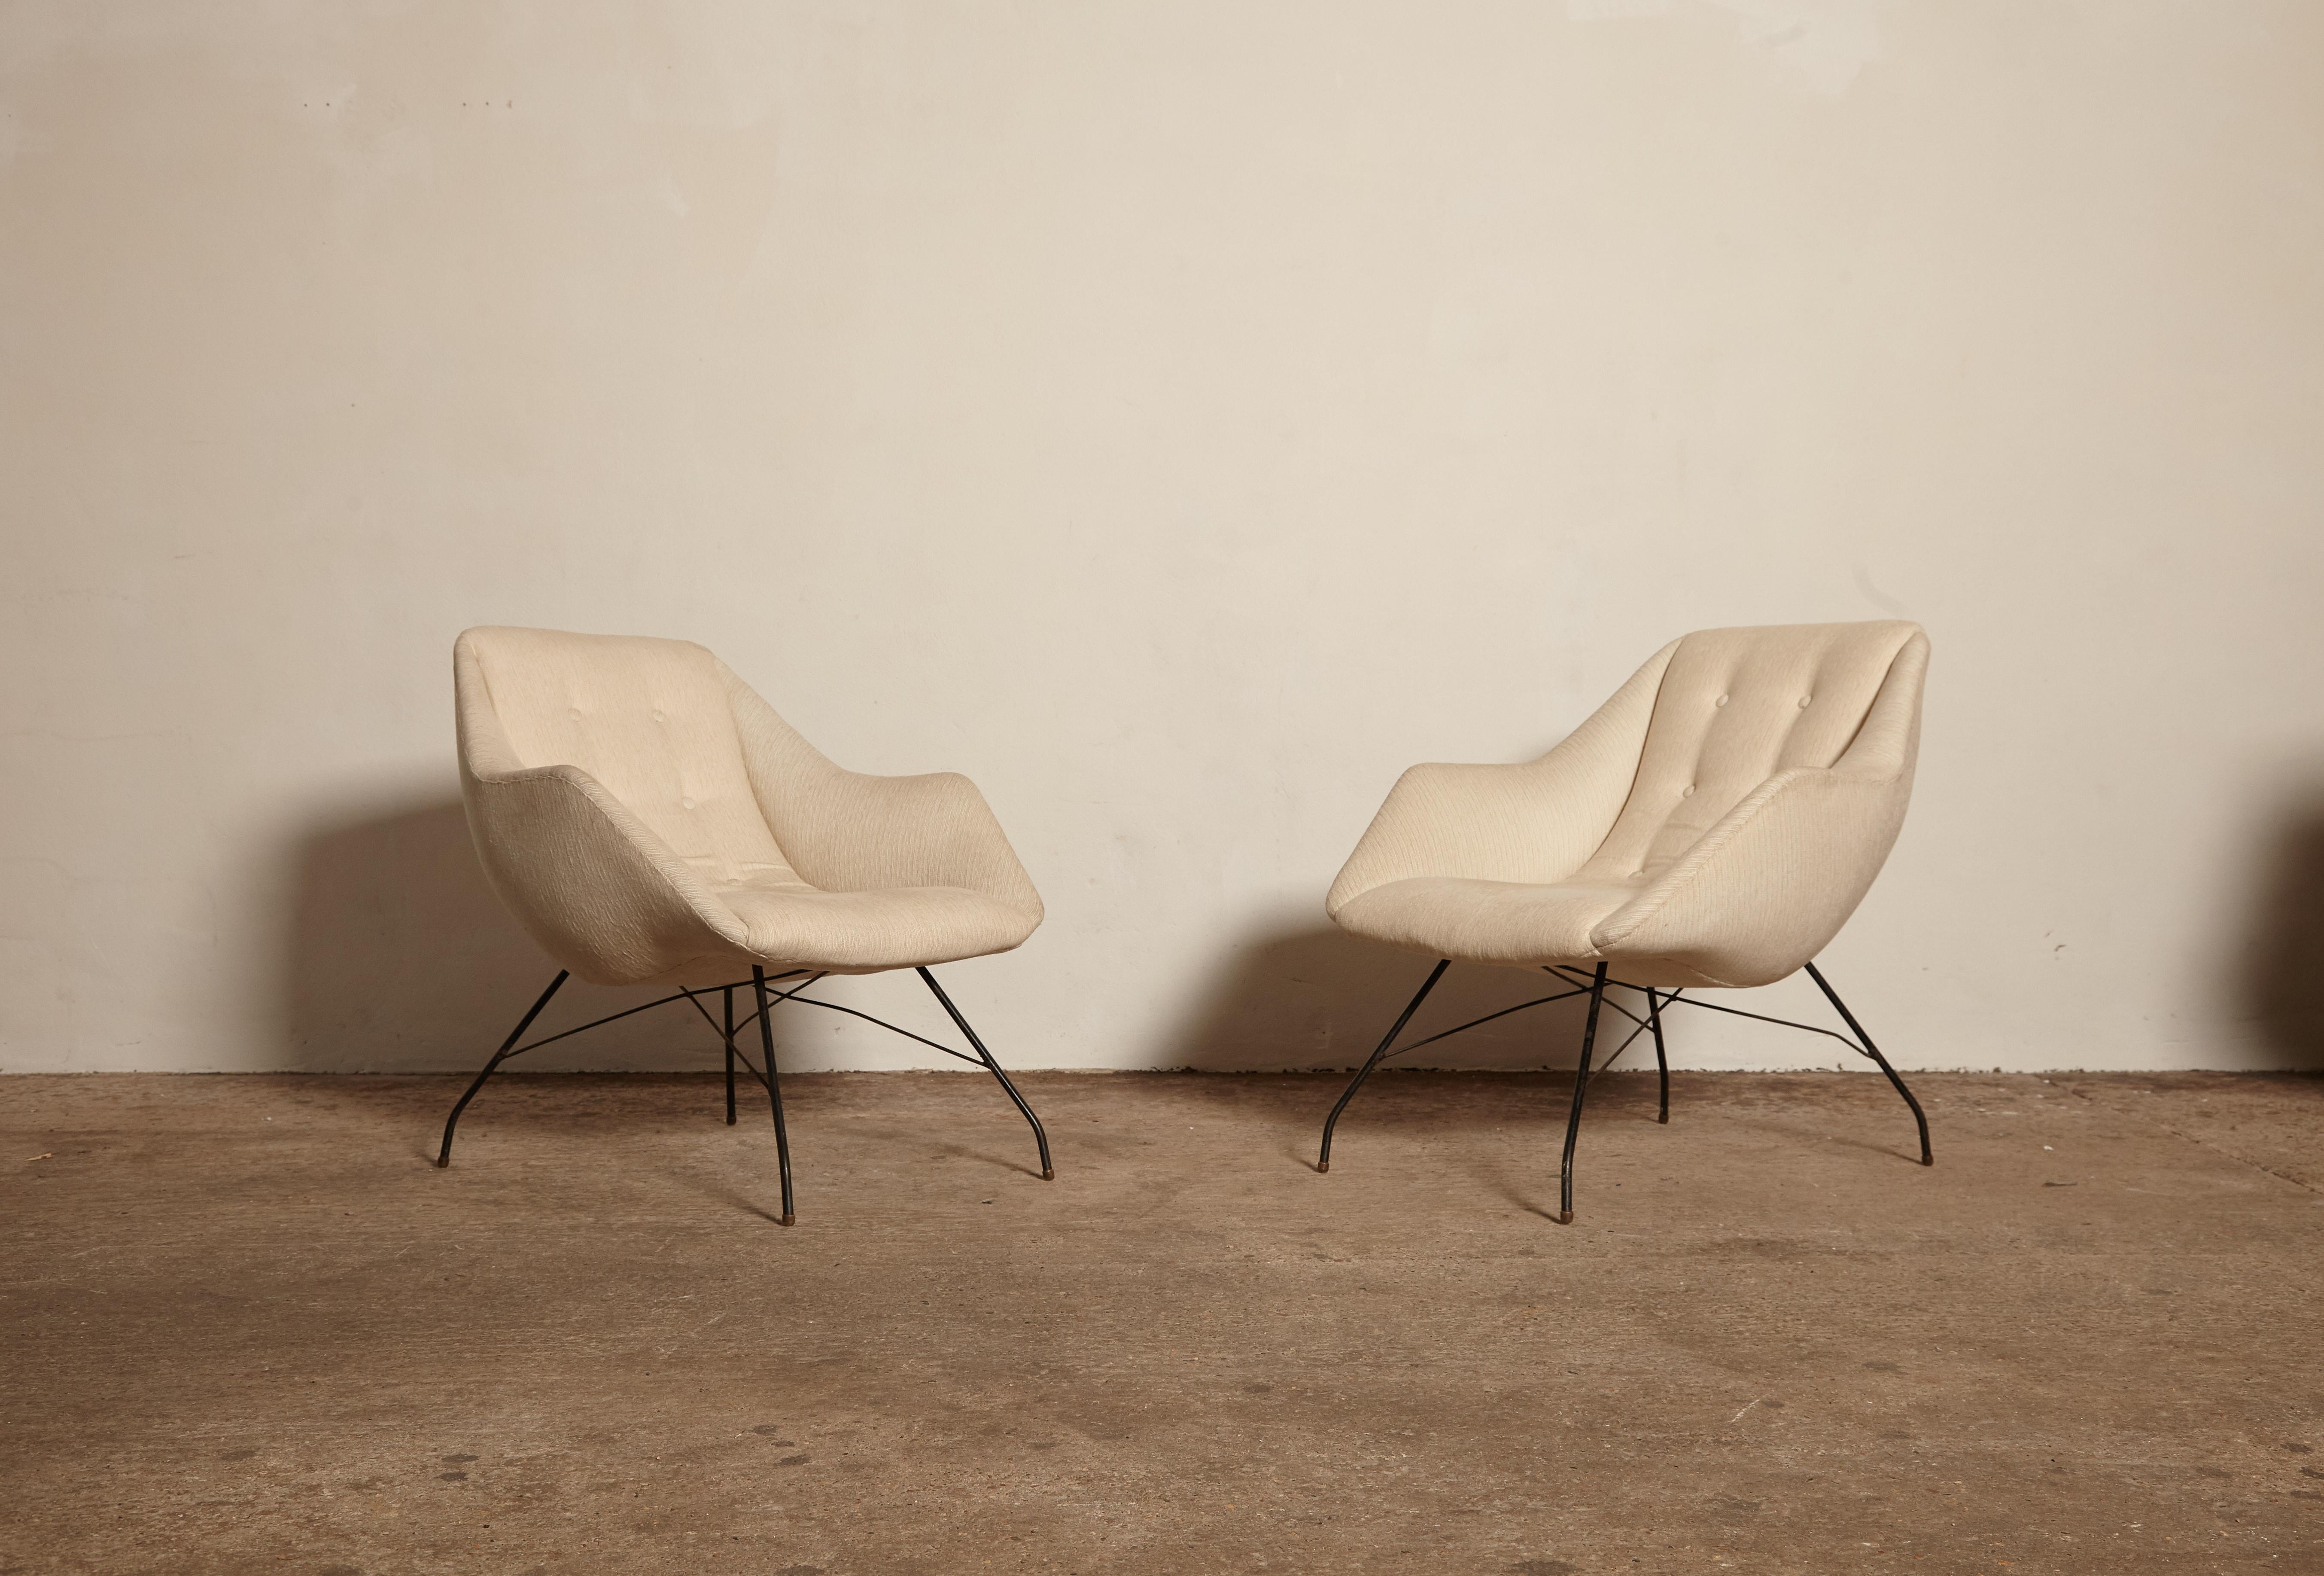 A rare authentic pair of Carlo Hauner and Martin Eisler Shell (Concha) lounge chairs, manufactured by Forma Brazil, 1950s. Measures: 78 H x 73 W x 76 D cm. In good original condition, some minor paint loss to steel legs, structurally sound, original